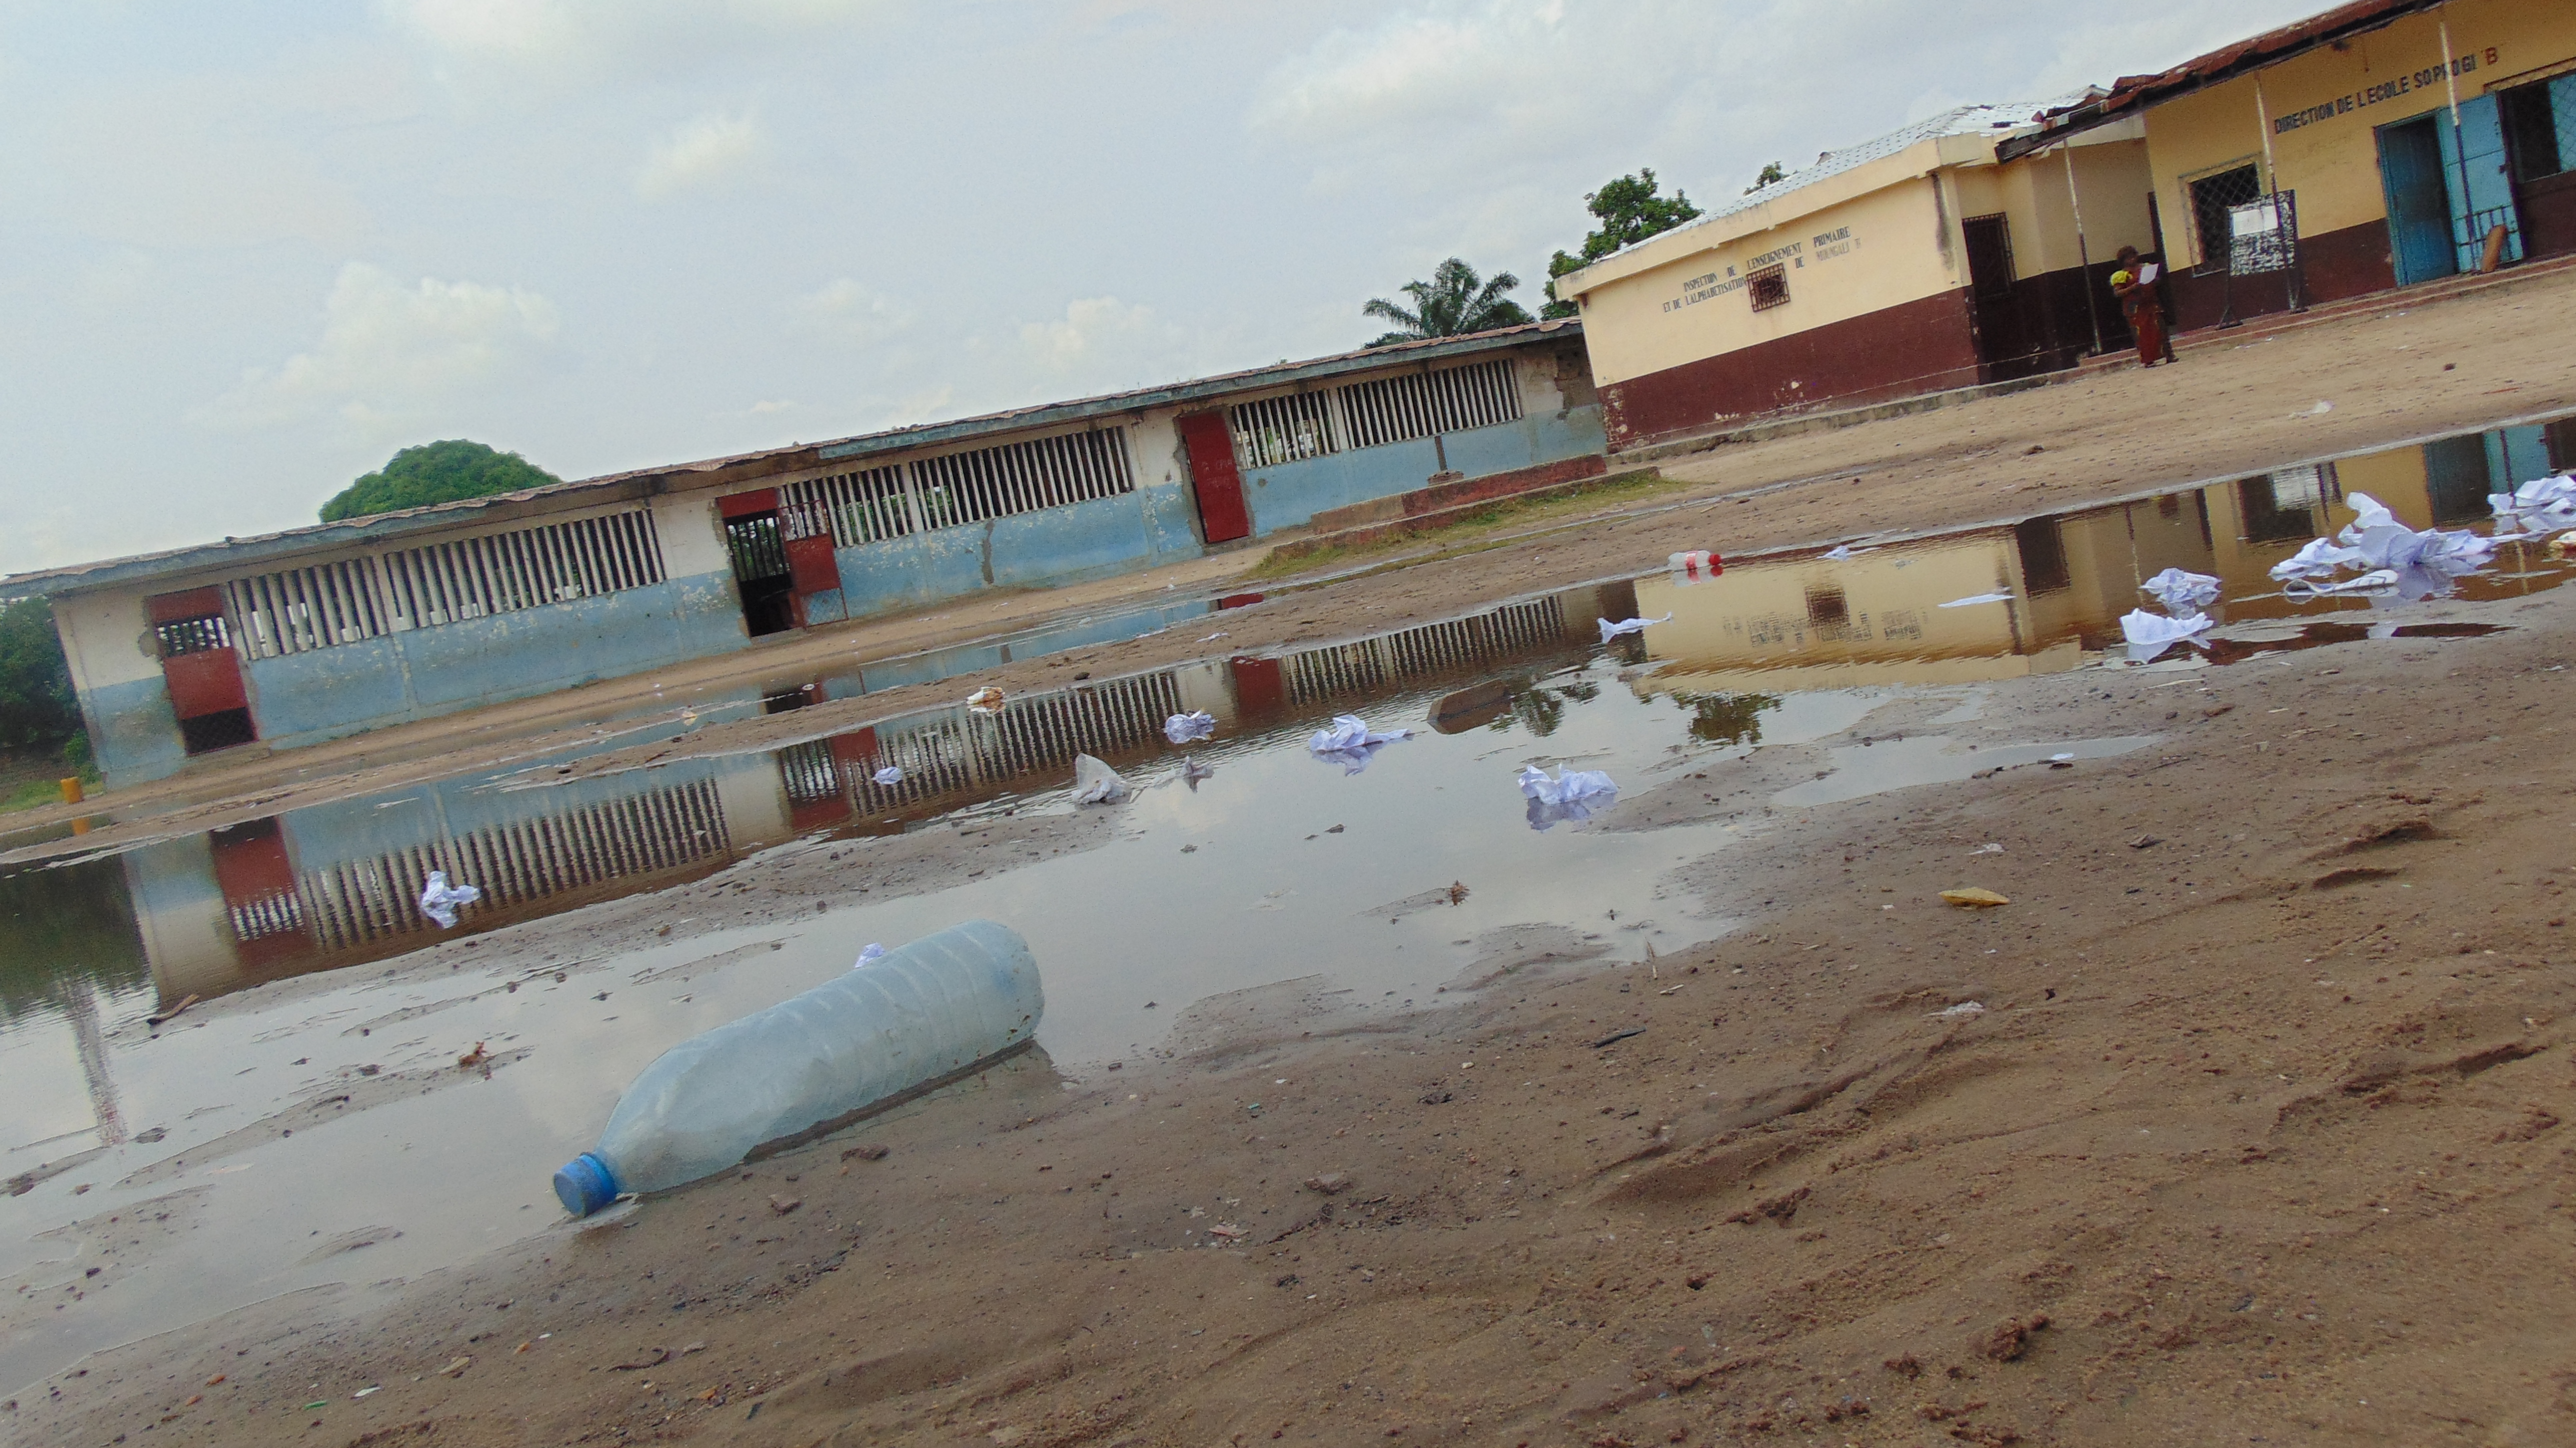 school compound that is very dirty